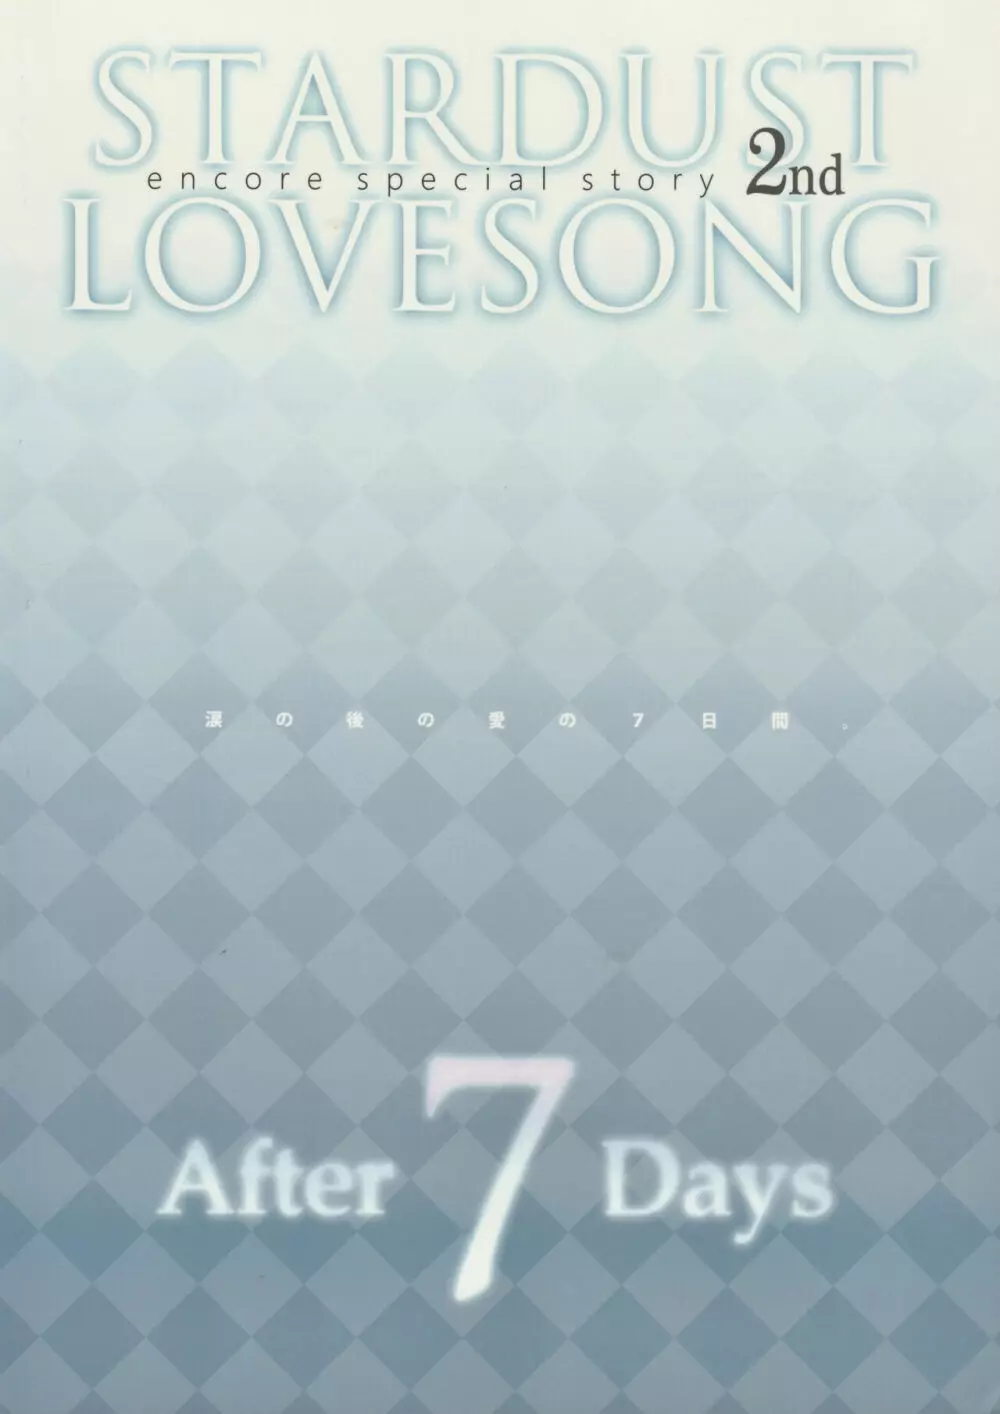 STARDUST LOVESONG encore special story 2nd After 7 Days 2nd 46ページ